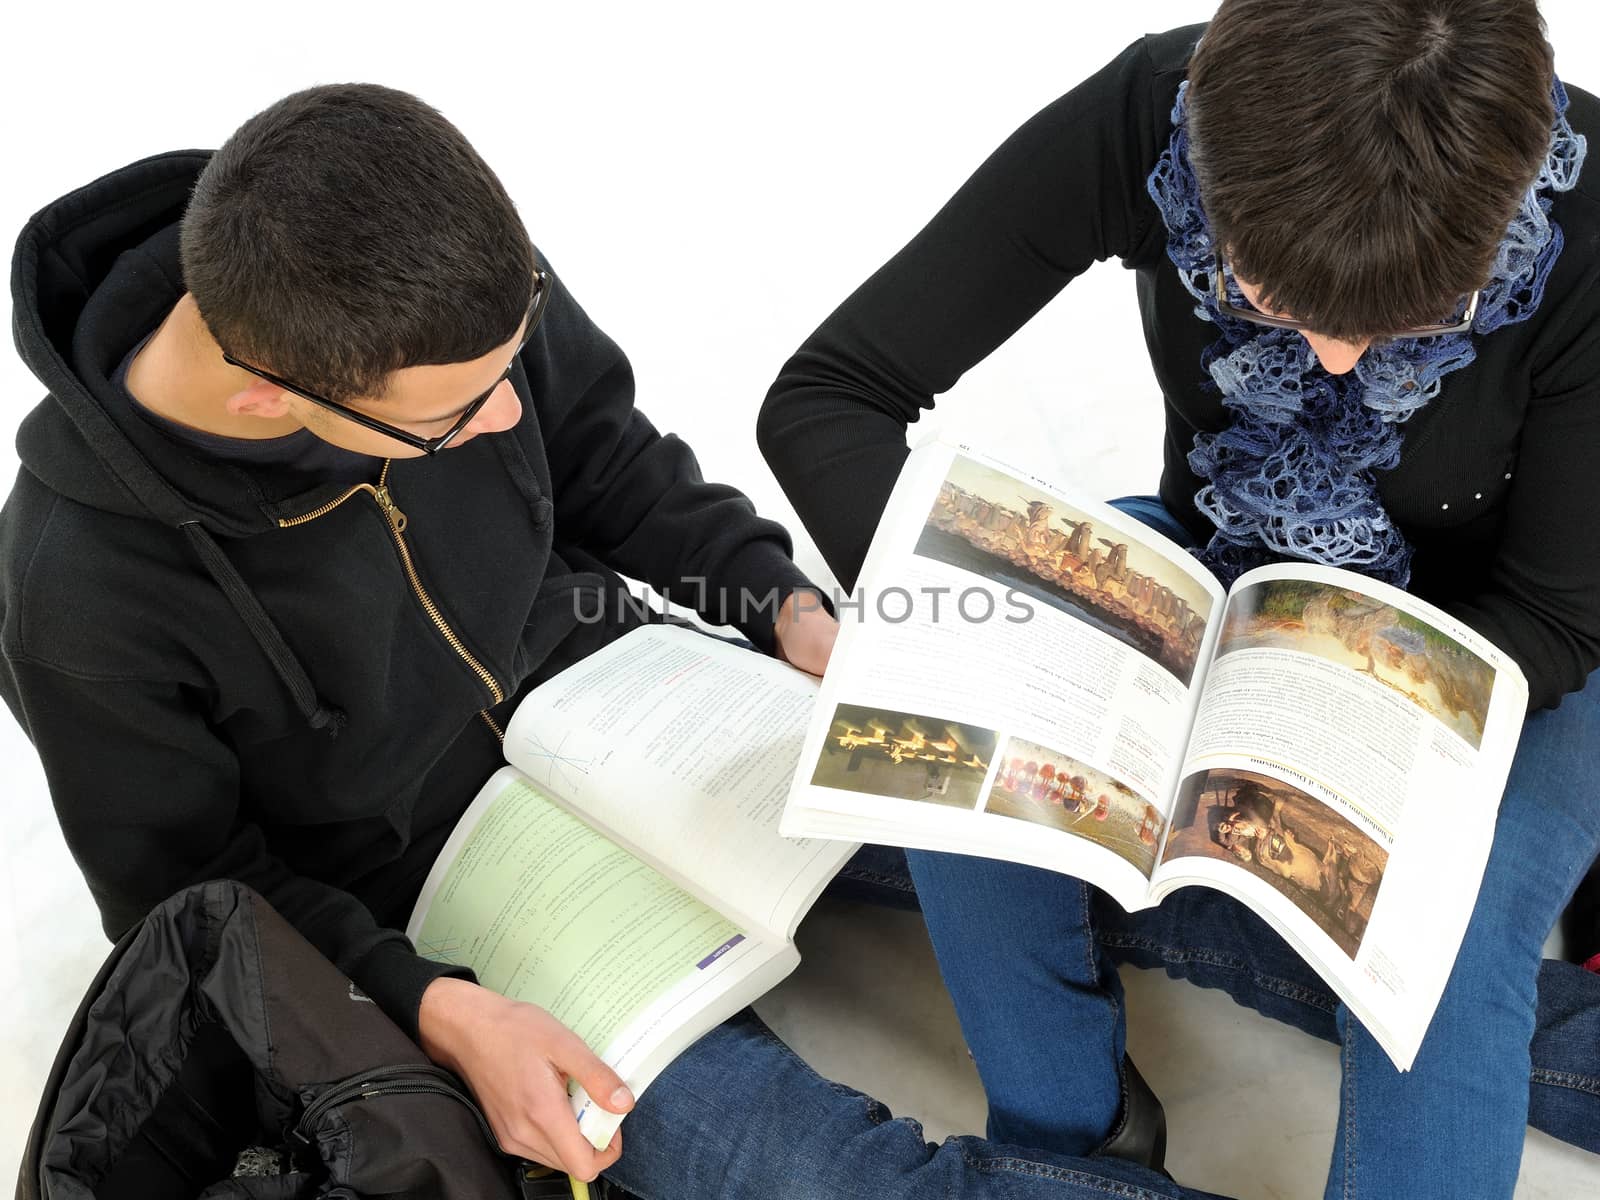 Students engaged in the study